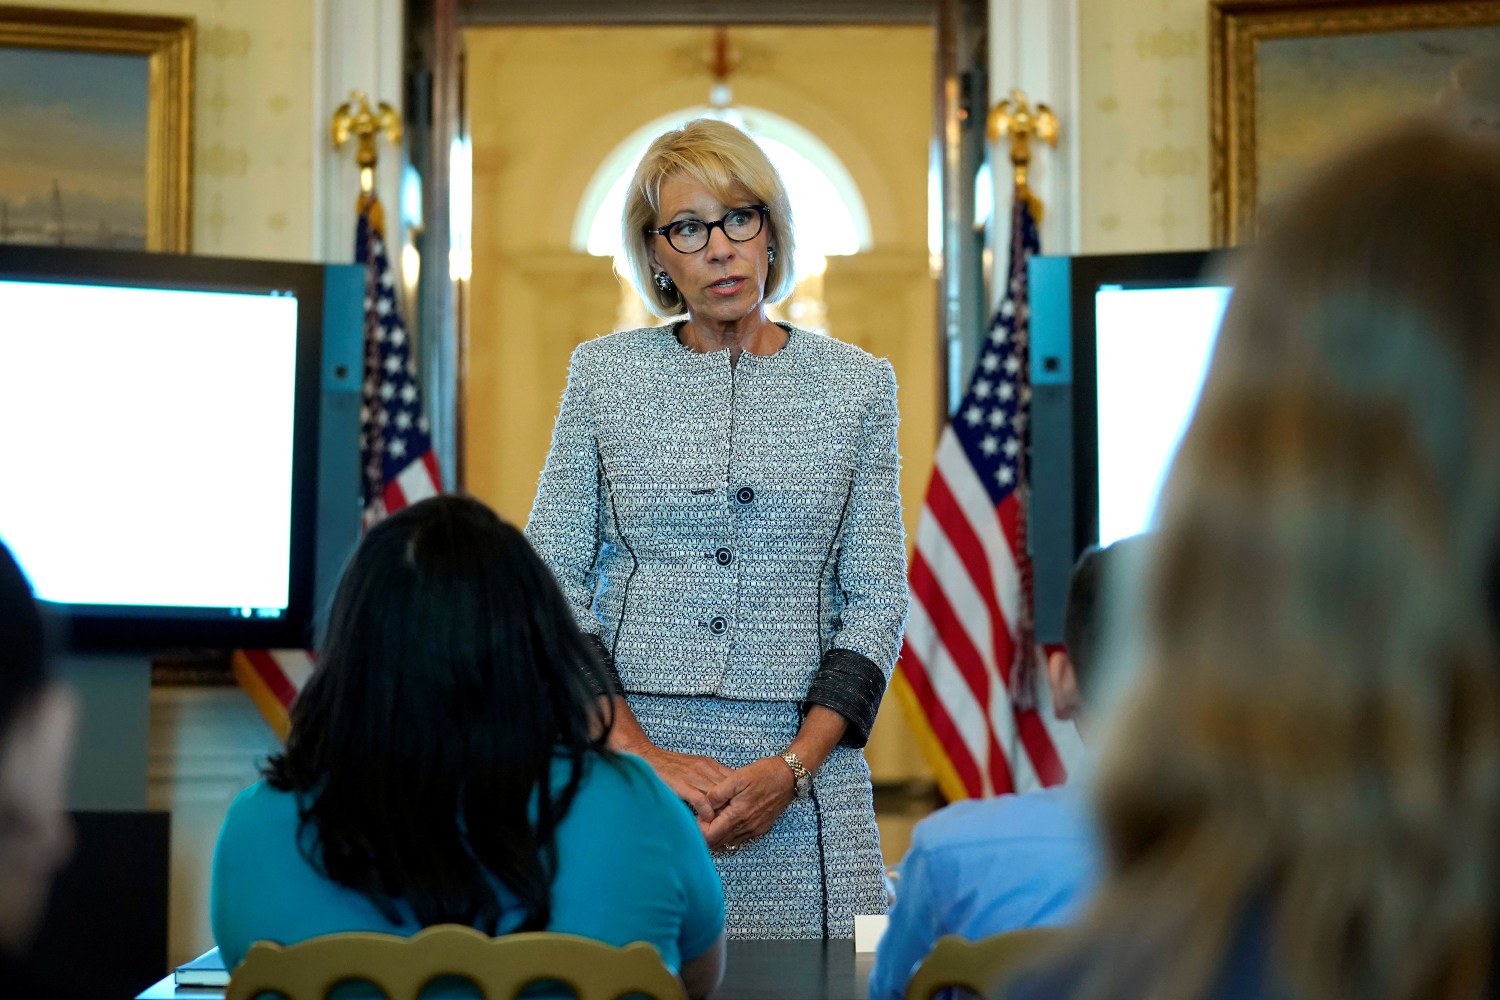 U.S. Secretary of Education Betsy DeVos speaks with school children during a listening session before the arrival of U.S. first lady Melania Trump at the White House in Washington, U.S., April 9, 2018. REUTERS/Joshua Roberts - RC14E35B0270